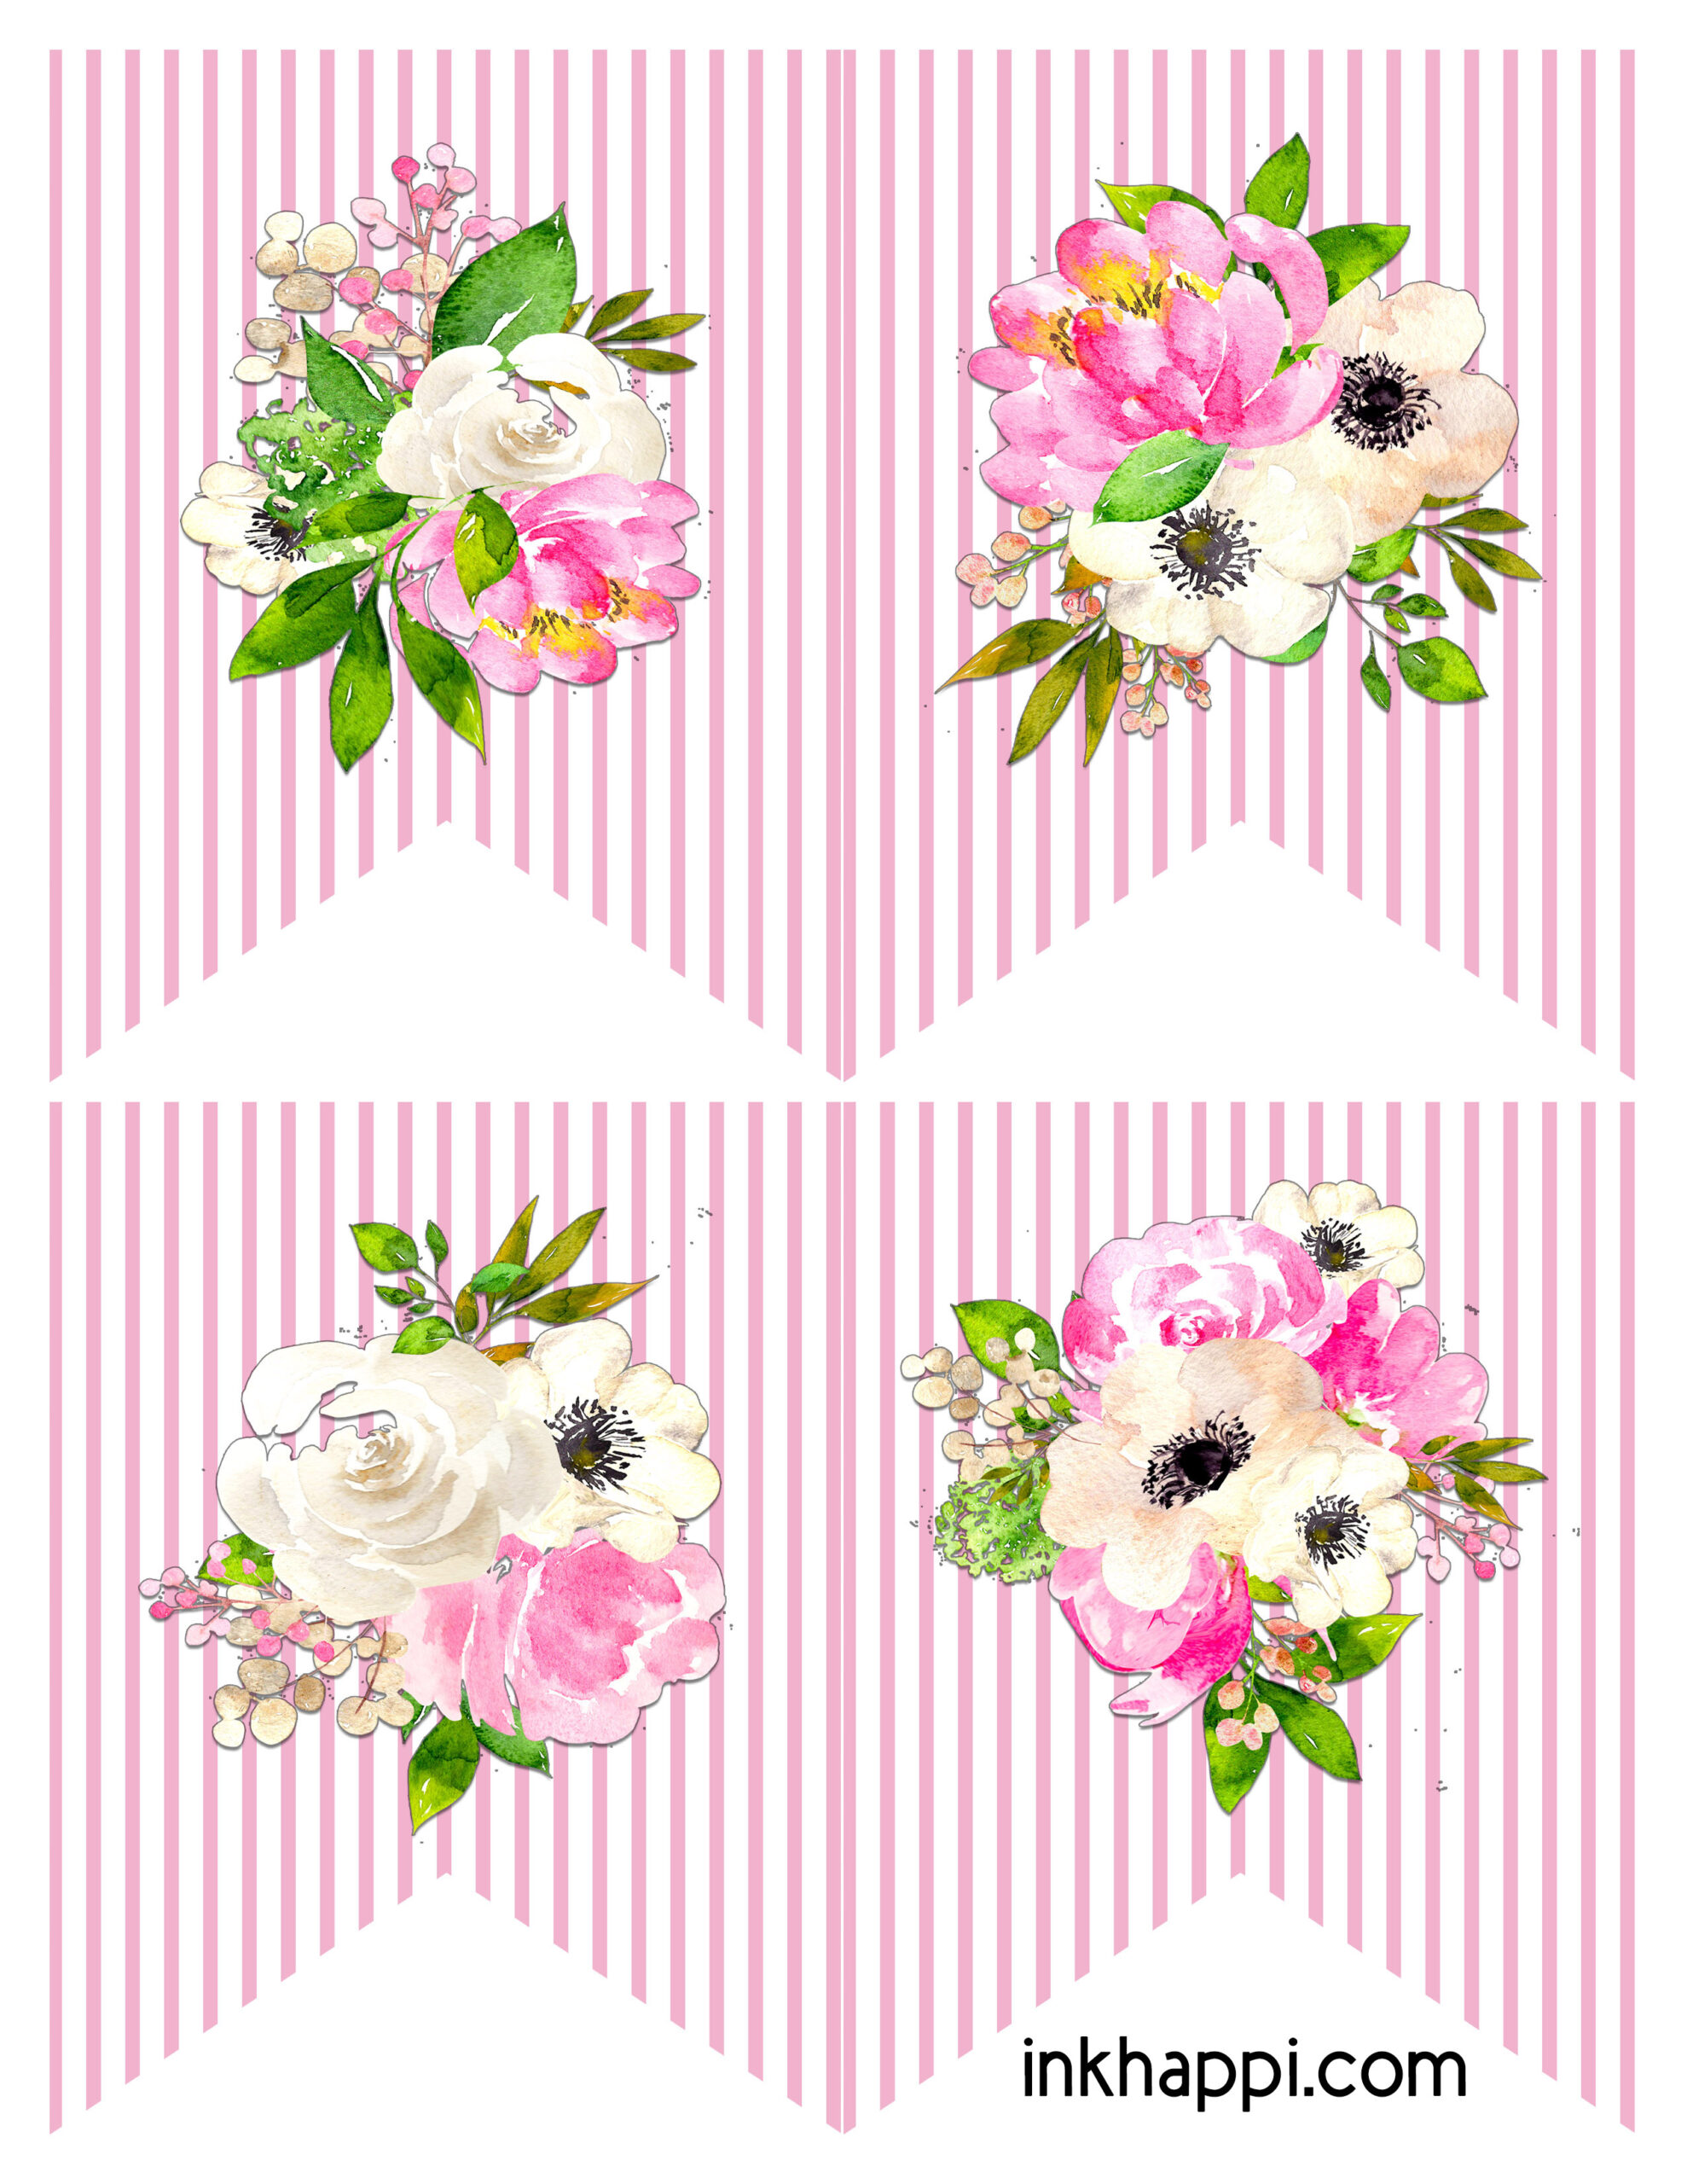 hello-spring-banner-greetings-design-background-with-colorful-flower